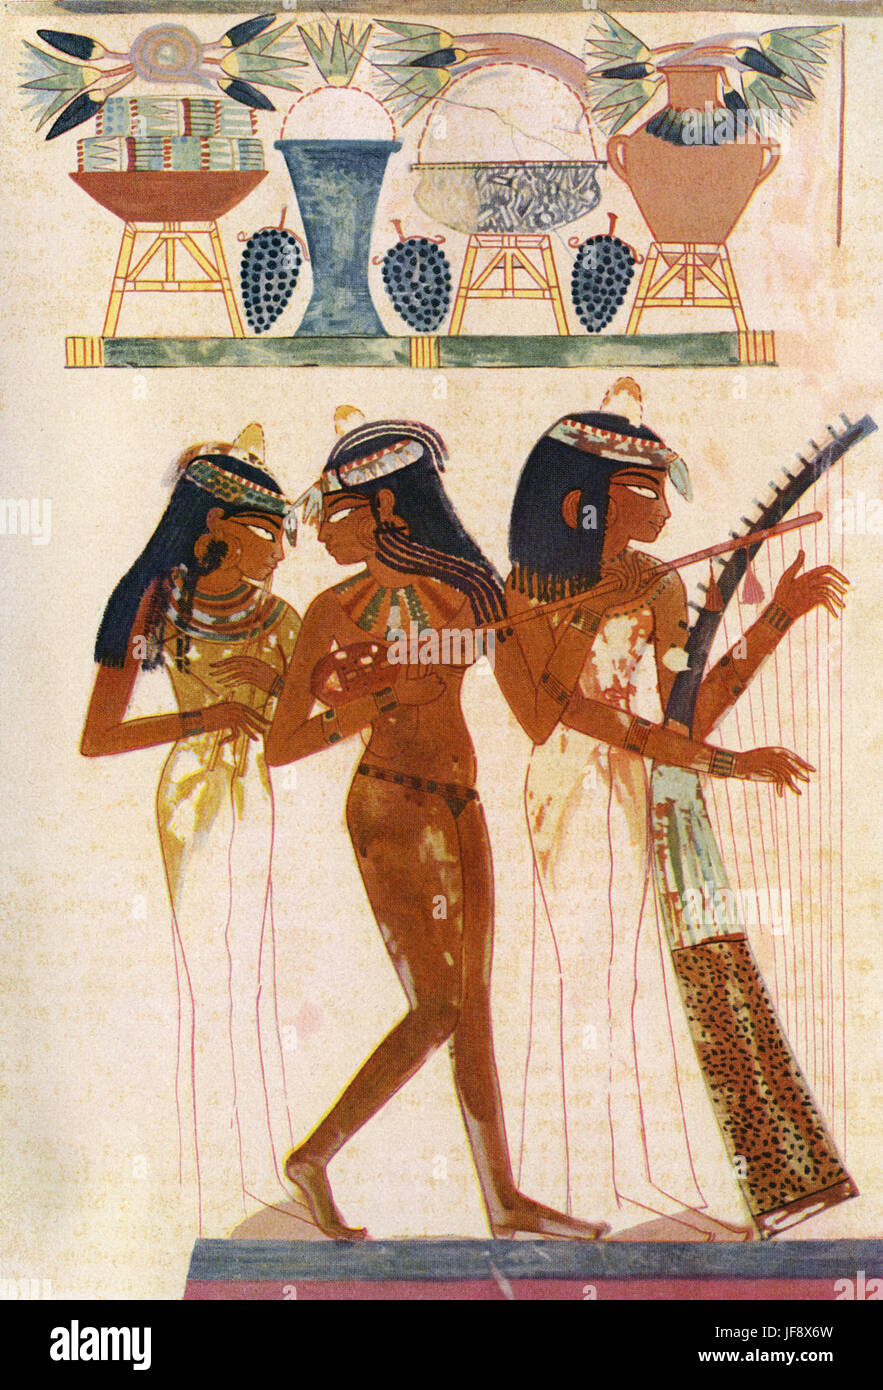 Musicians playing harp from from tomb of Nakht (ancient Egyptian official). Girl playing harp with large sound box, lute player and double flute or double aulos player.  Note pots on reed mat with lotus blossoms across them.  ( Theban Tomb TT52  located in Sheikh Abd el-Qurna, part of the Theban Necropolis,   on West Bank of the Nile, opposite Luxor) Stock Photo